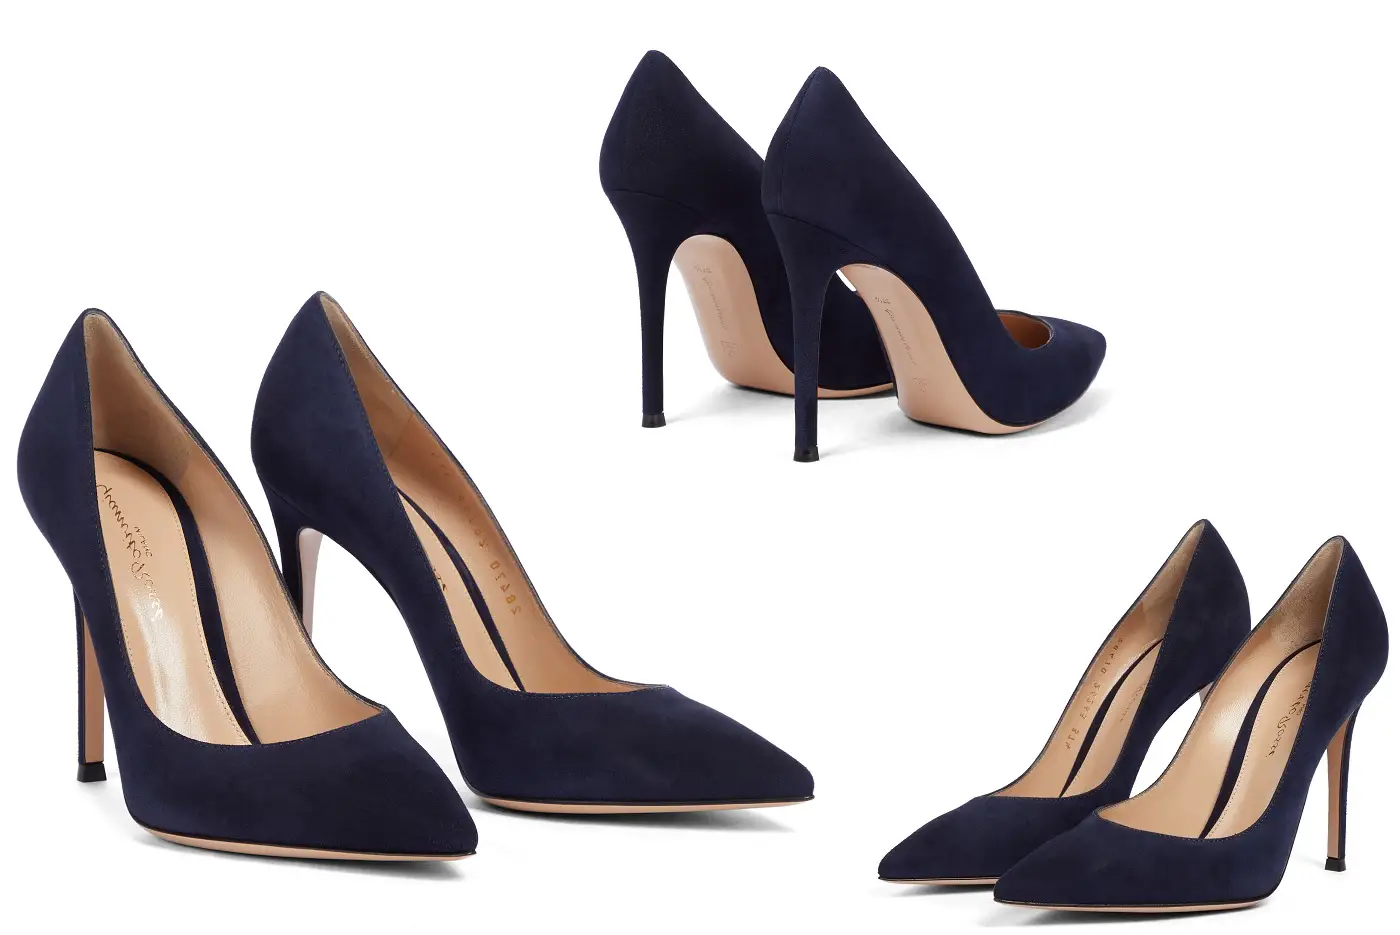 The Duchess of Cambride wore Gianvito Rossi 105 Blue Suede Pumps